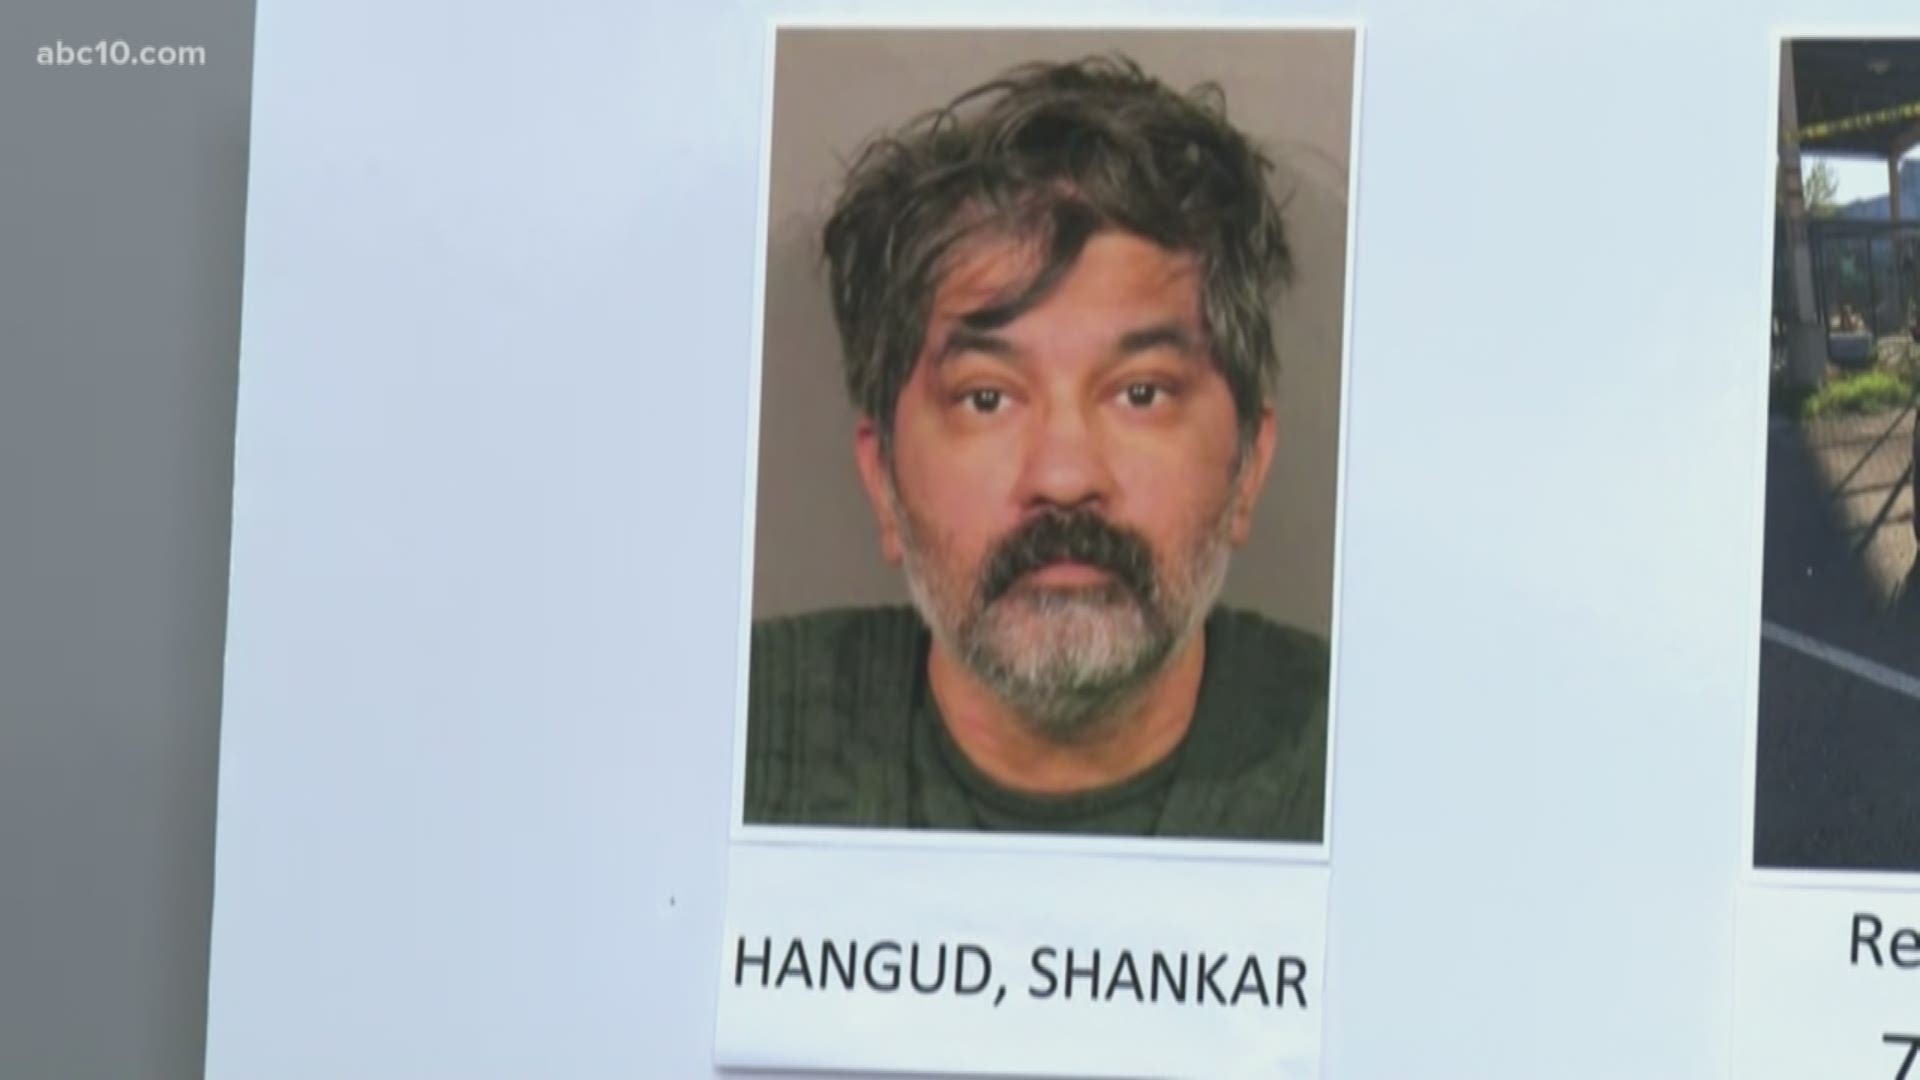 Two adults and two juveniles are dead and the suspect, Shankar Hangud, of Roseville, is in police custody.